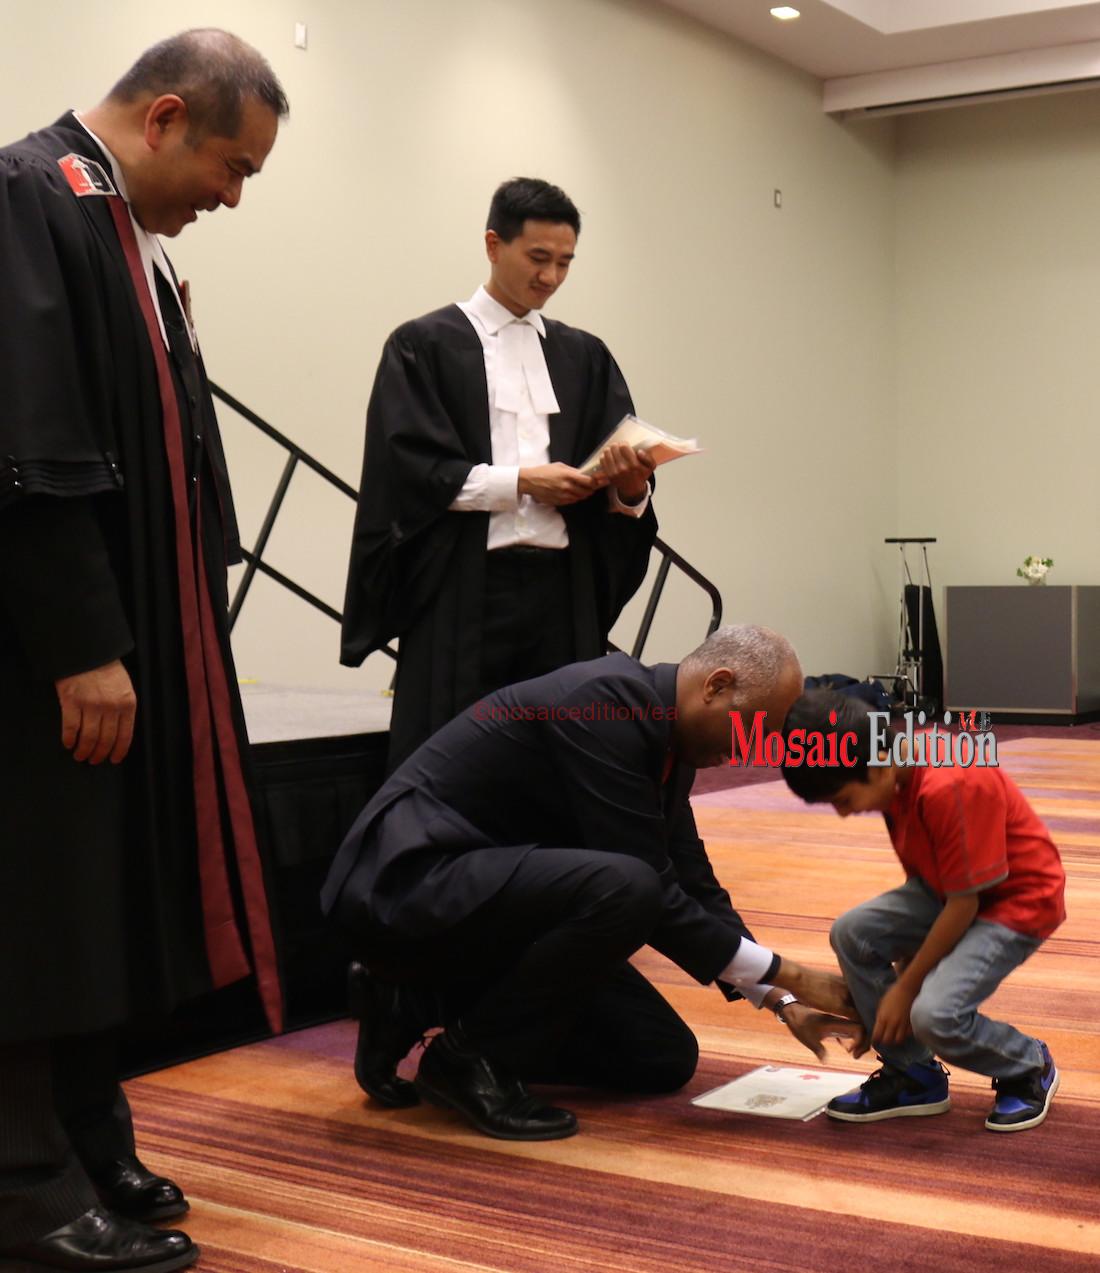 Immigration Minister Hussen helps new Canadian tie shoelace